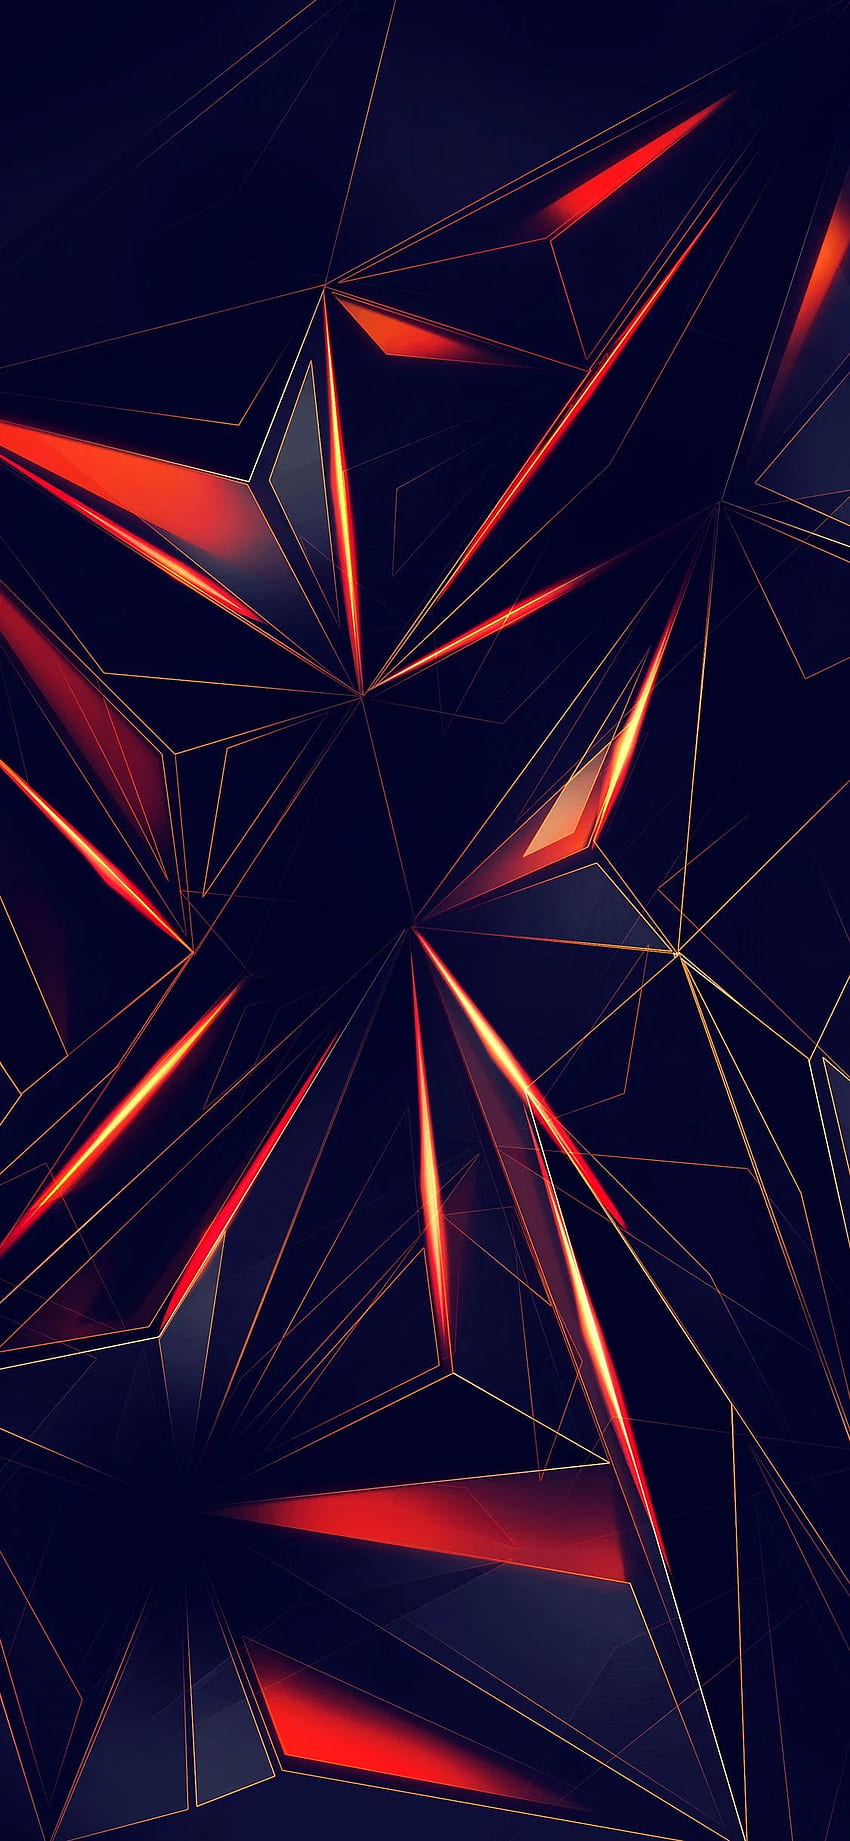 iOS 11, iPhone X, red, blue, clean, simple, abstract, apple, wallpaper,  iphone 8, clean, beauty, colo… | Iphone red wallpaper, Apple wallpaper  iphone, Red wallpaper